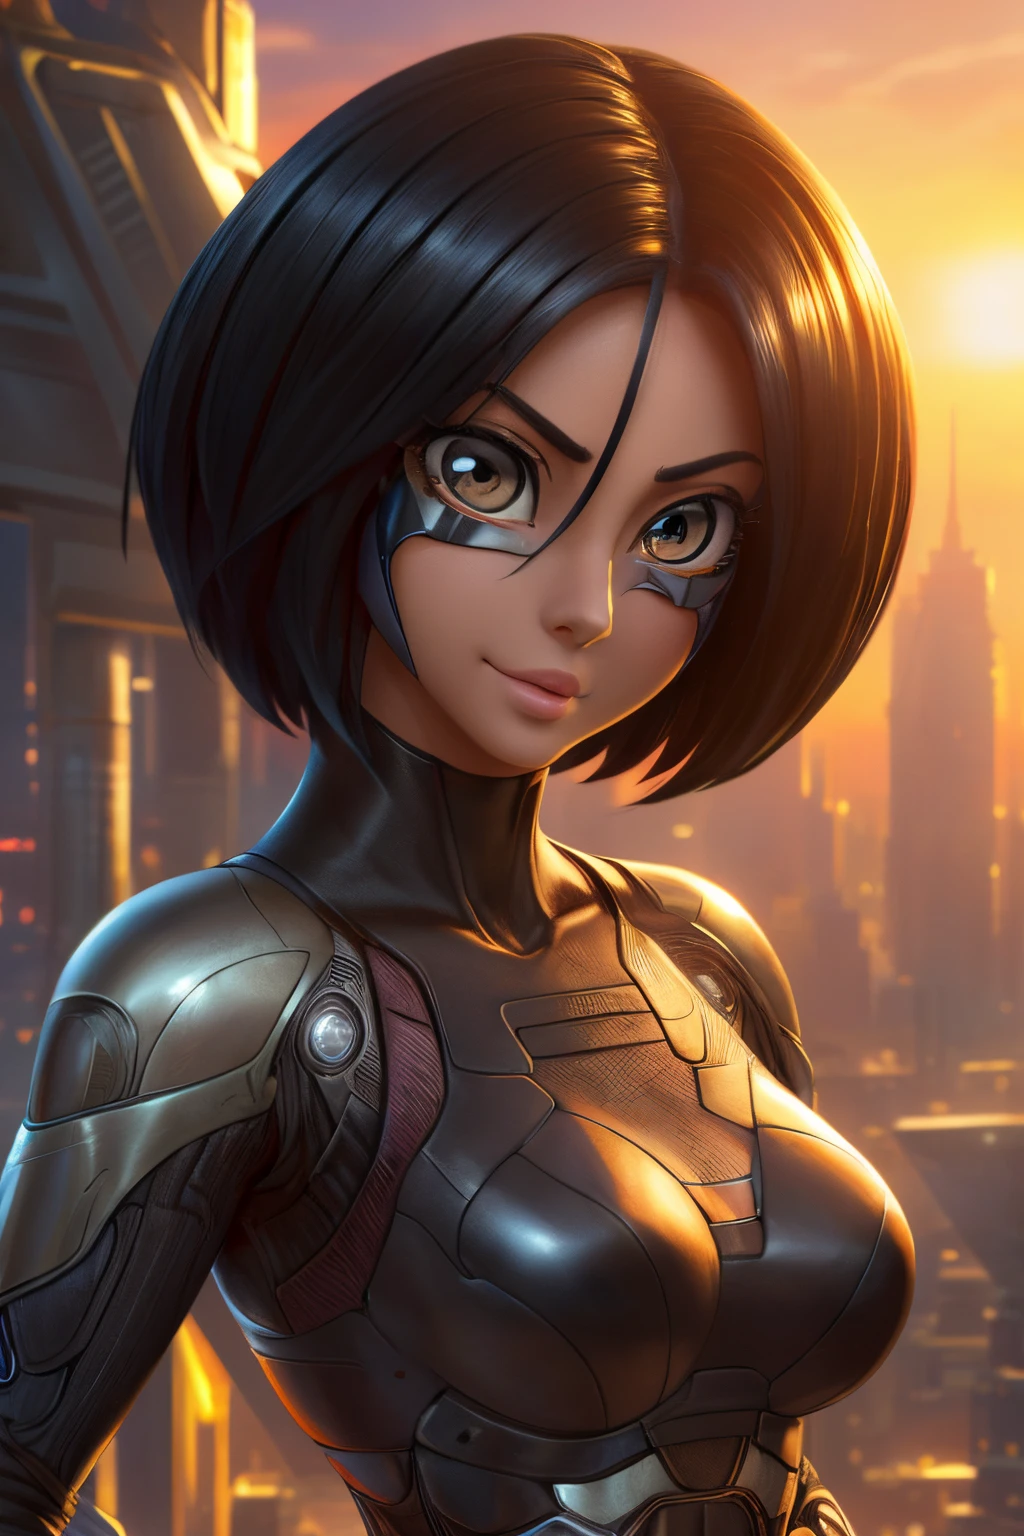 ((ultra quality)), ((tmasterpiece)), Alita Battle Angel, ((Black, Short Hair Hair)) (Beautiful cute face), (beautiful female lips), Charming, ((aroused expression)), looks at the camera with a gentle smile, eyes are slightly closed, (skin color white), Body glare, ((detailed beautiful female eyes)), ((light hazel eyes)), (juicy female lips), (beautiful female hands), ((perfect female figure)), perfect female body, Beautiful waist, gorgeous big thighs, beautiful breasts, ((Subtle and beautiful)), stands, (close-up of the face), (Alita costume) background: Cyberpunk city, Beautiful sunset, ((Depth of field)), ((high quality clear image)), (crisp details), ((higly detailed)), Realistic, Professional Photo Session, ((Clear Focus)), the anime